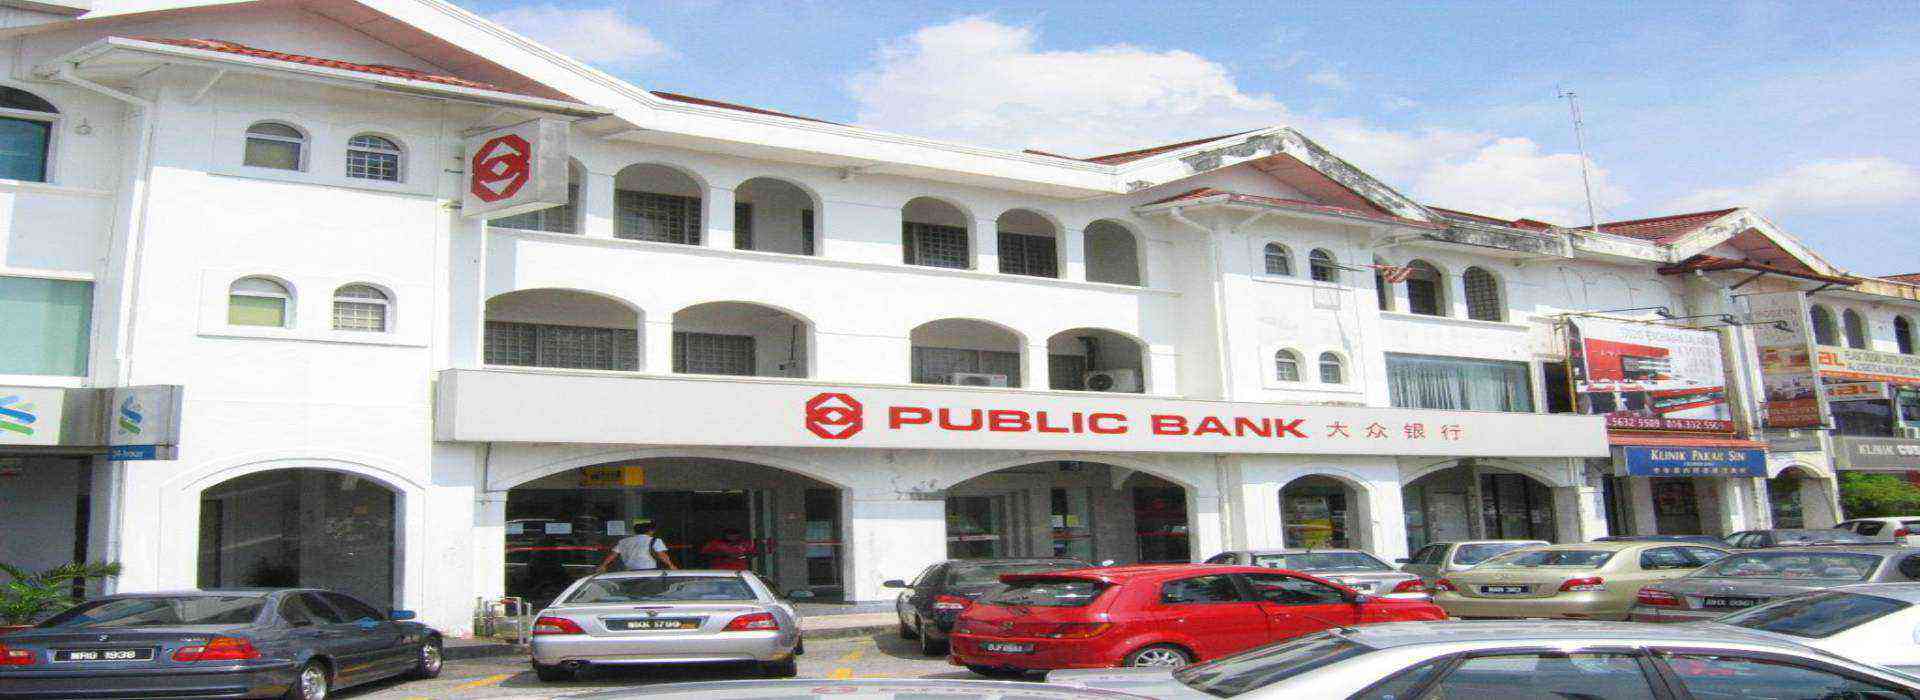 Public Bank Malaysia Customer Service Number Address Email